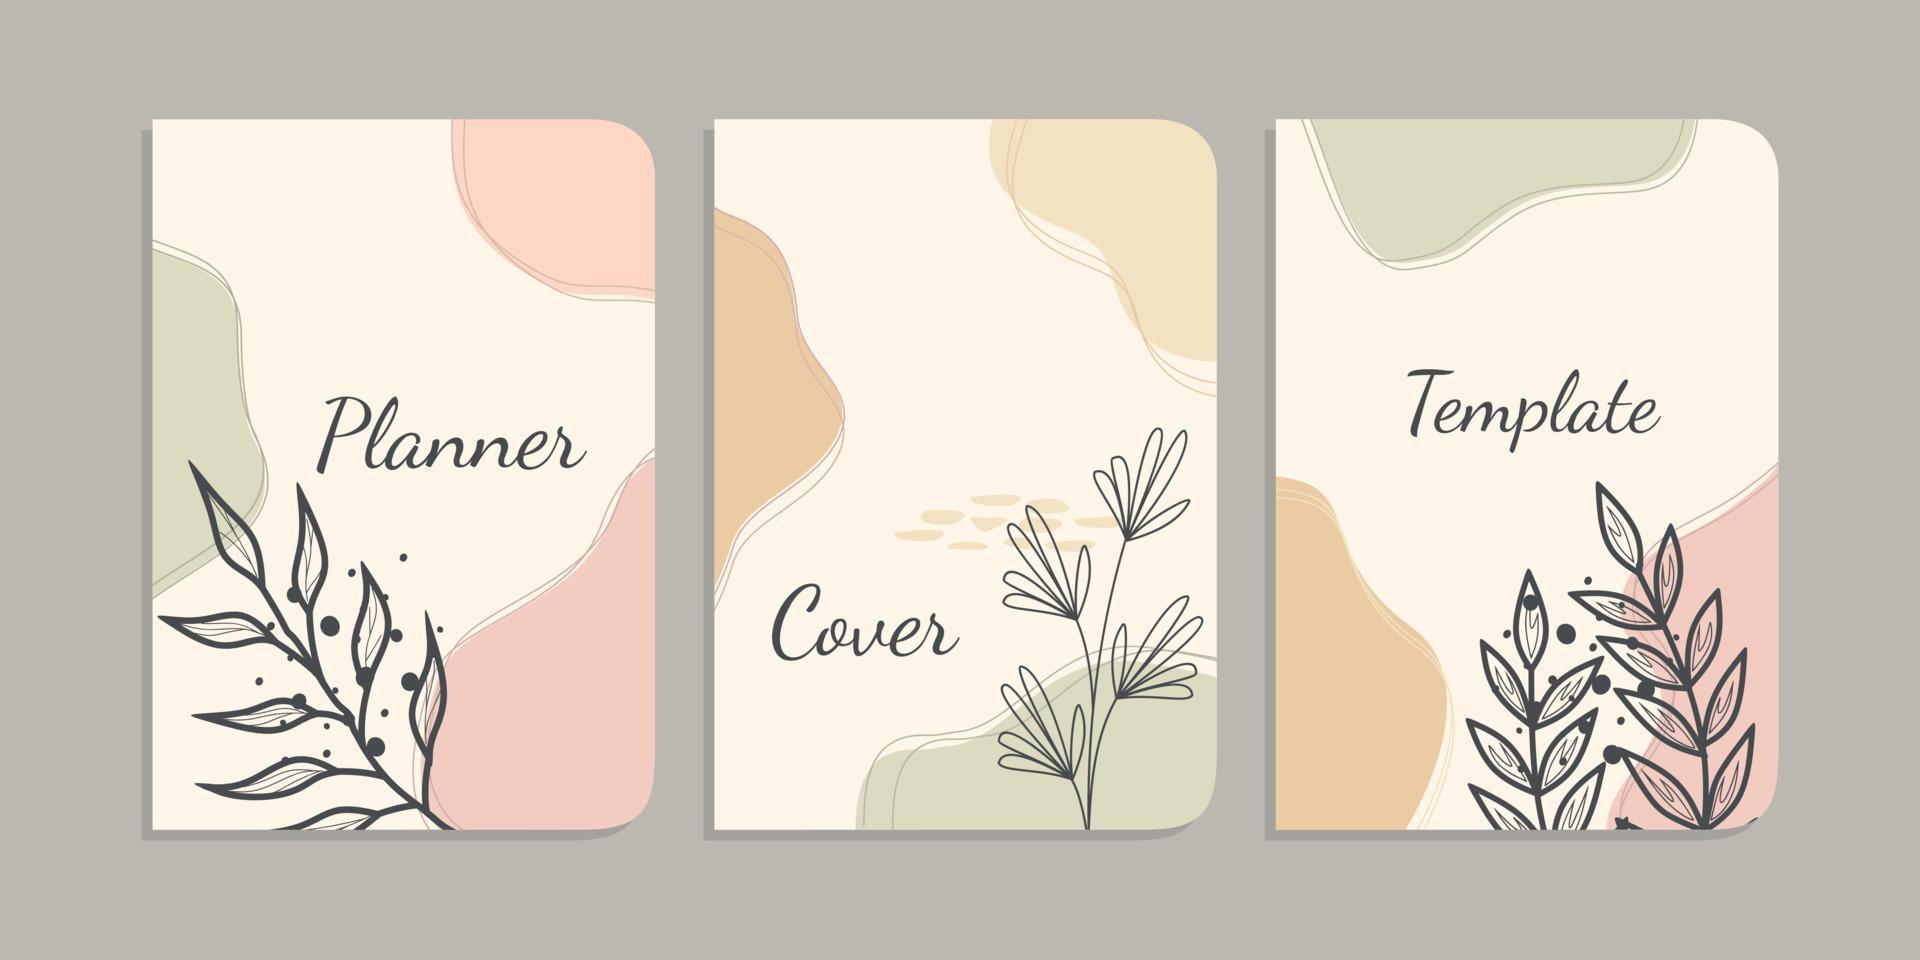 set of school book cover designs with hand drawn floral decorations. aesthetic botanical abstract background. size A4 For notebooks, diaries, planners, brochures, books, catalogs vector